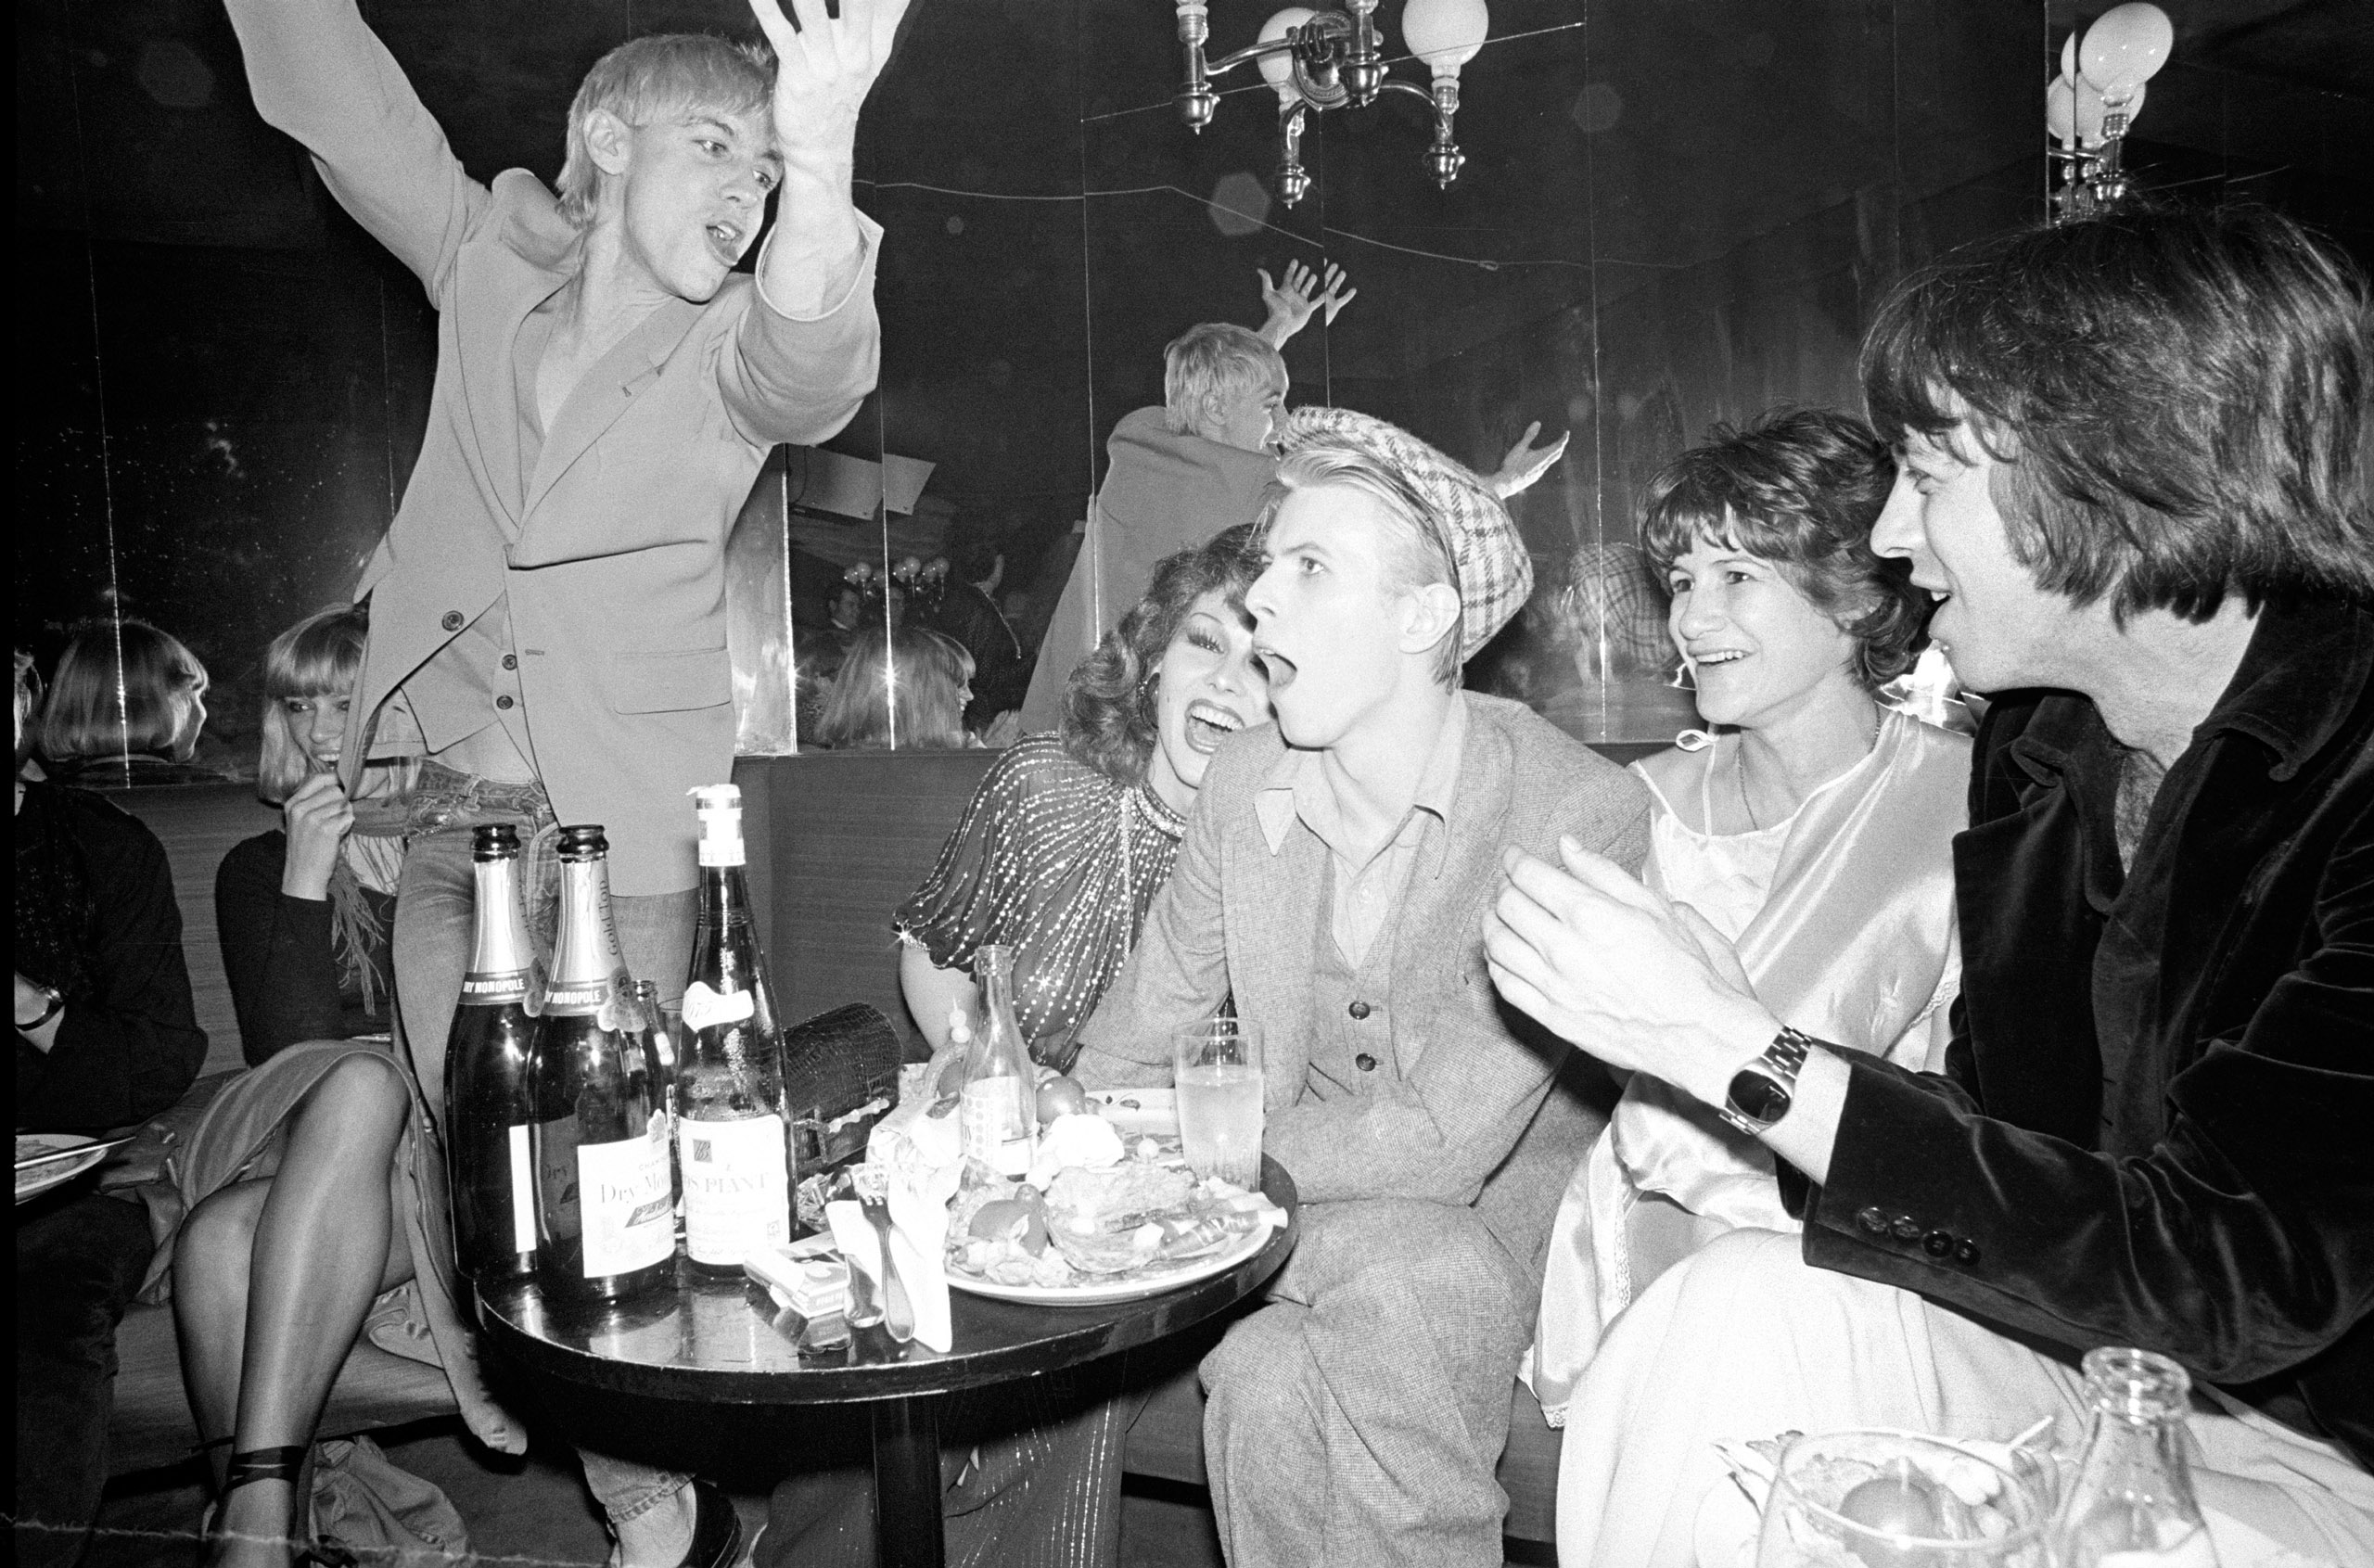 Bowie celebrates his birthday and the end of the Isolar tour at L’ange Bleu in Paris with (from left to right) Iggy Pop, Romy Haag, Coco Schwab, and Pat Gibbons.